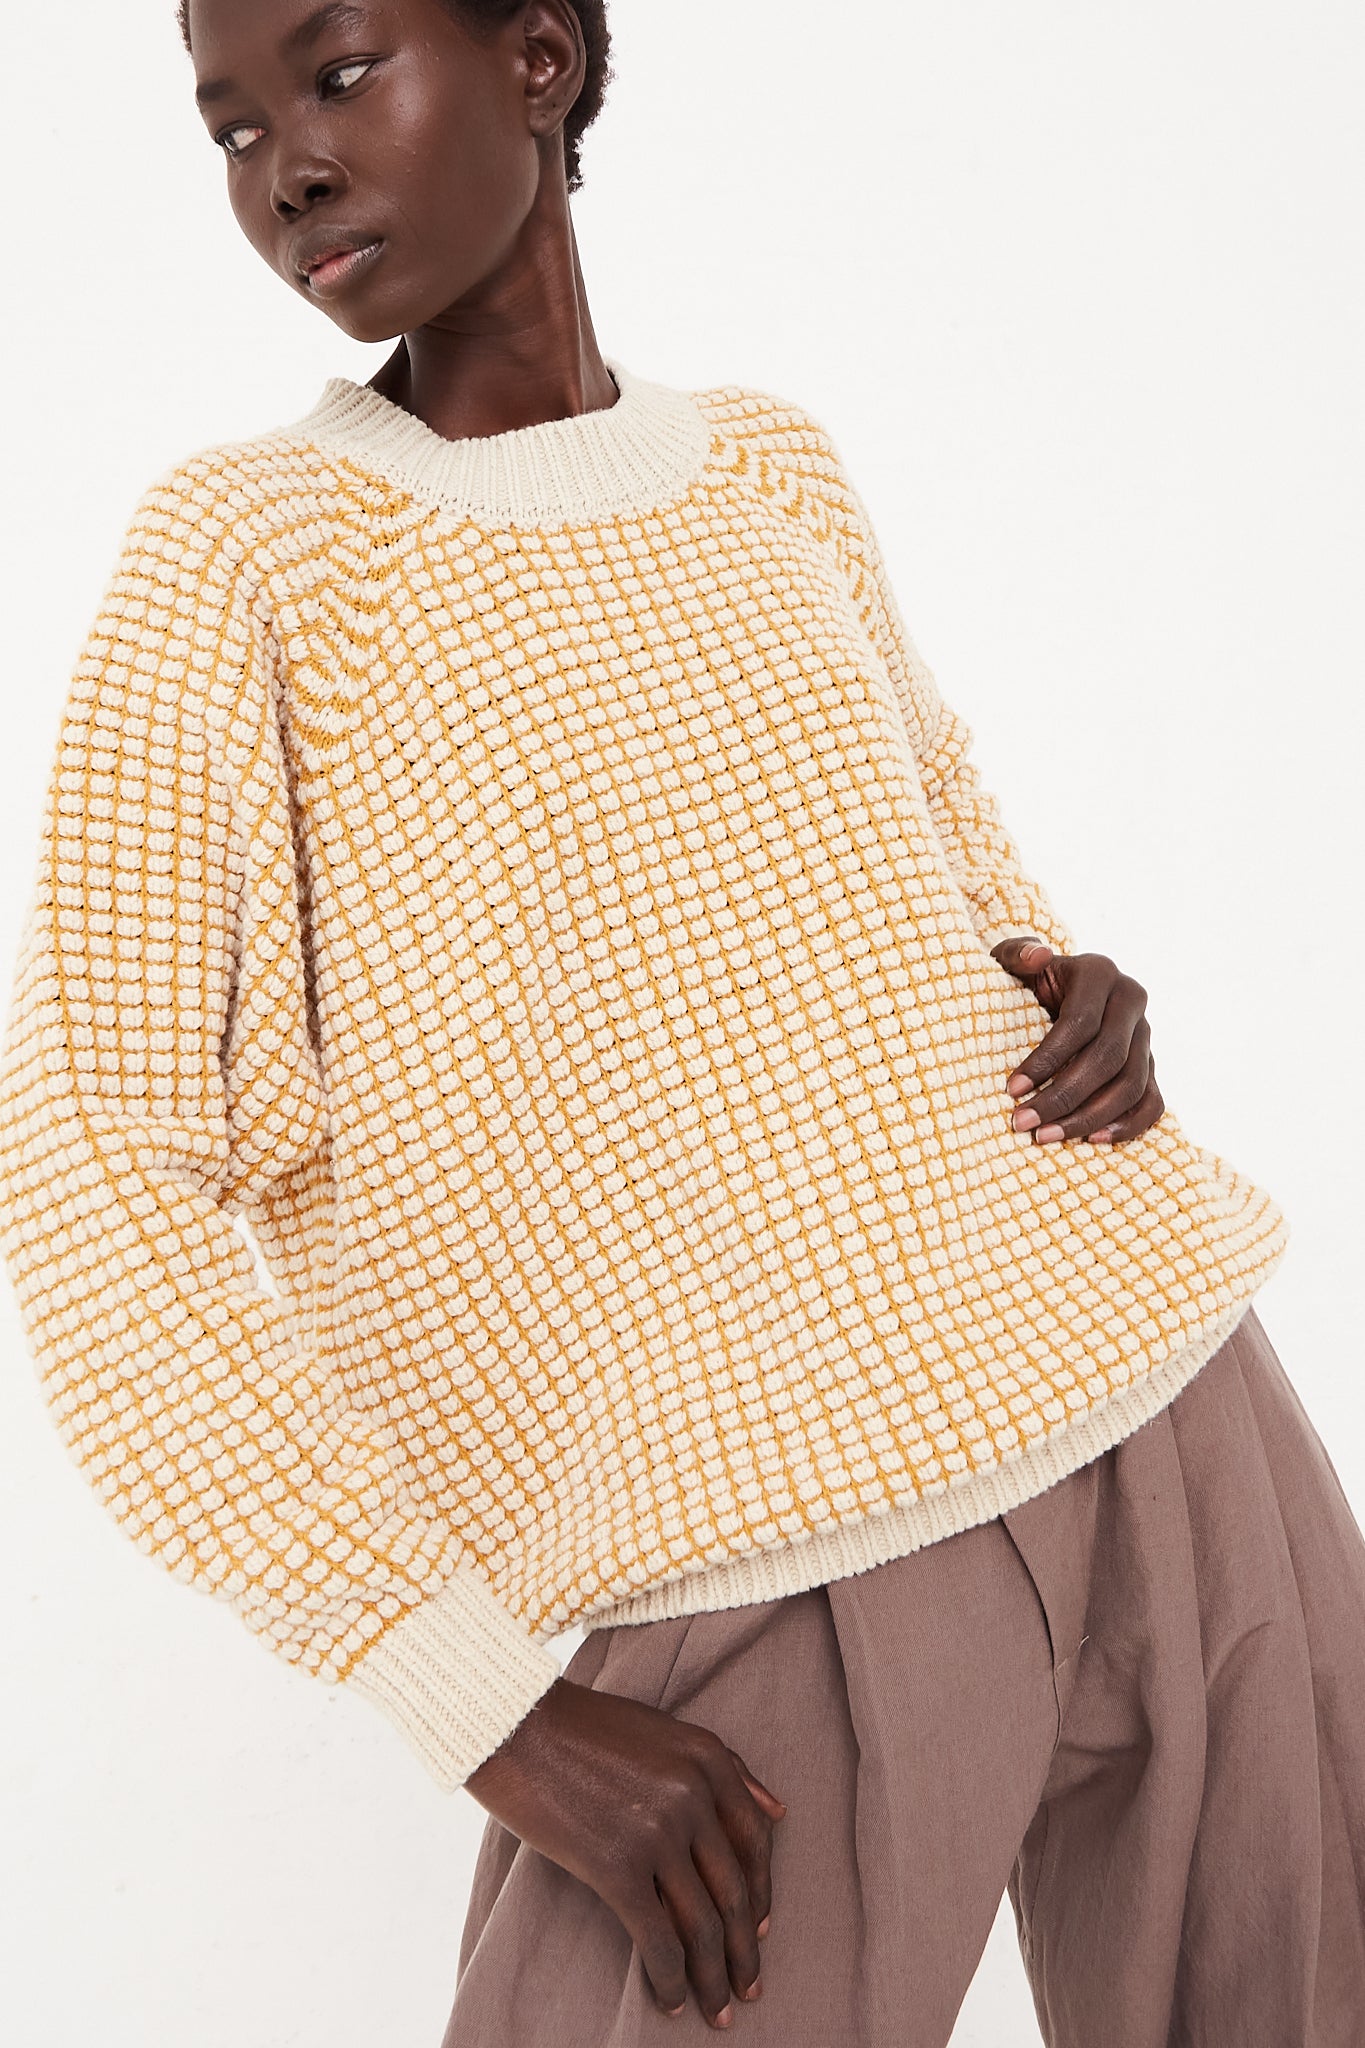 The model is wearing an oversized Lalin Crewneck Sweater in Natural Gold checkered made of merino wool by Jan-Jan Van Essche.